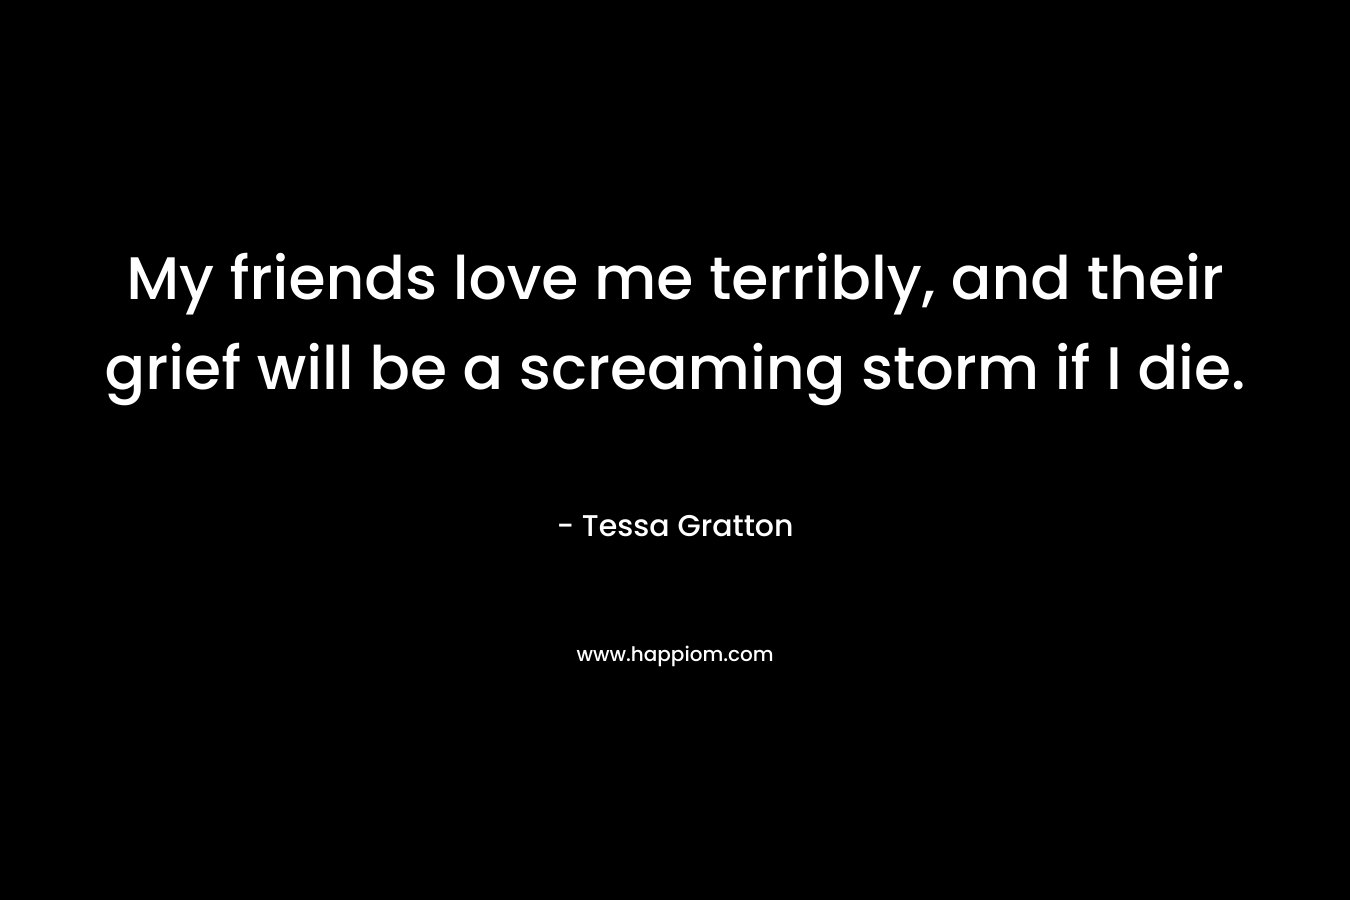 My friends love me terribly, and their grief will be a screaming storm if I die.